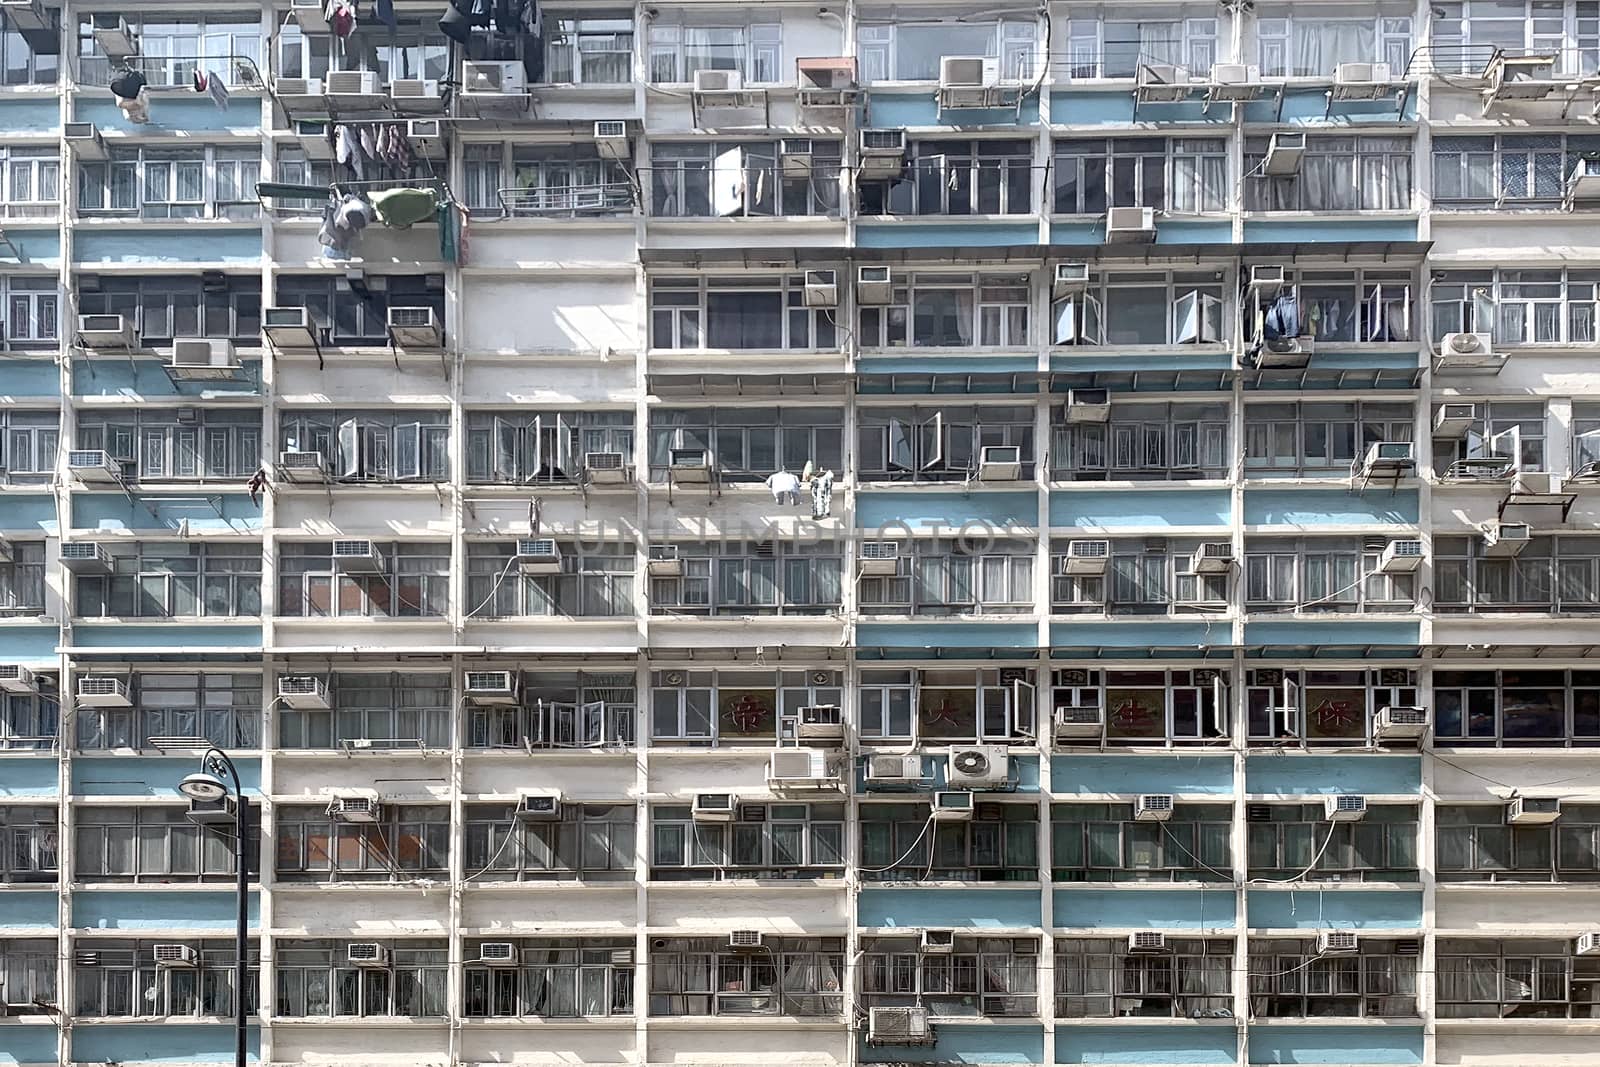 The old crowded housing apartment in Hong Kong residential estate 